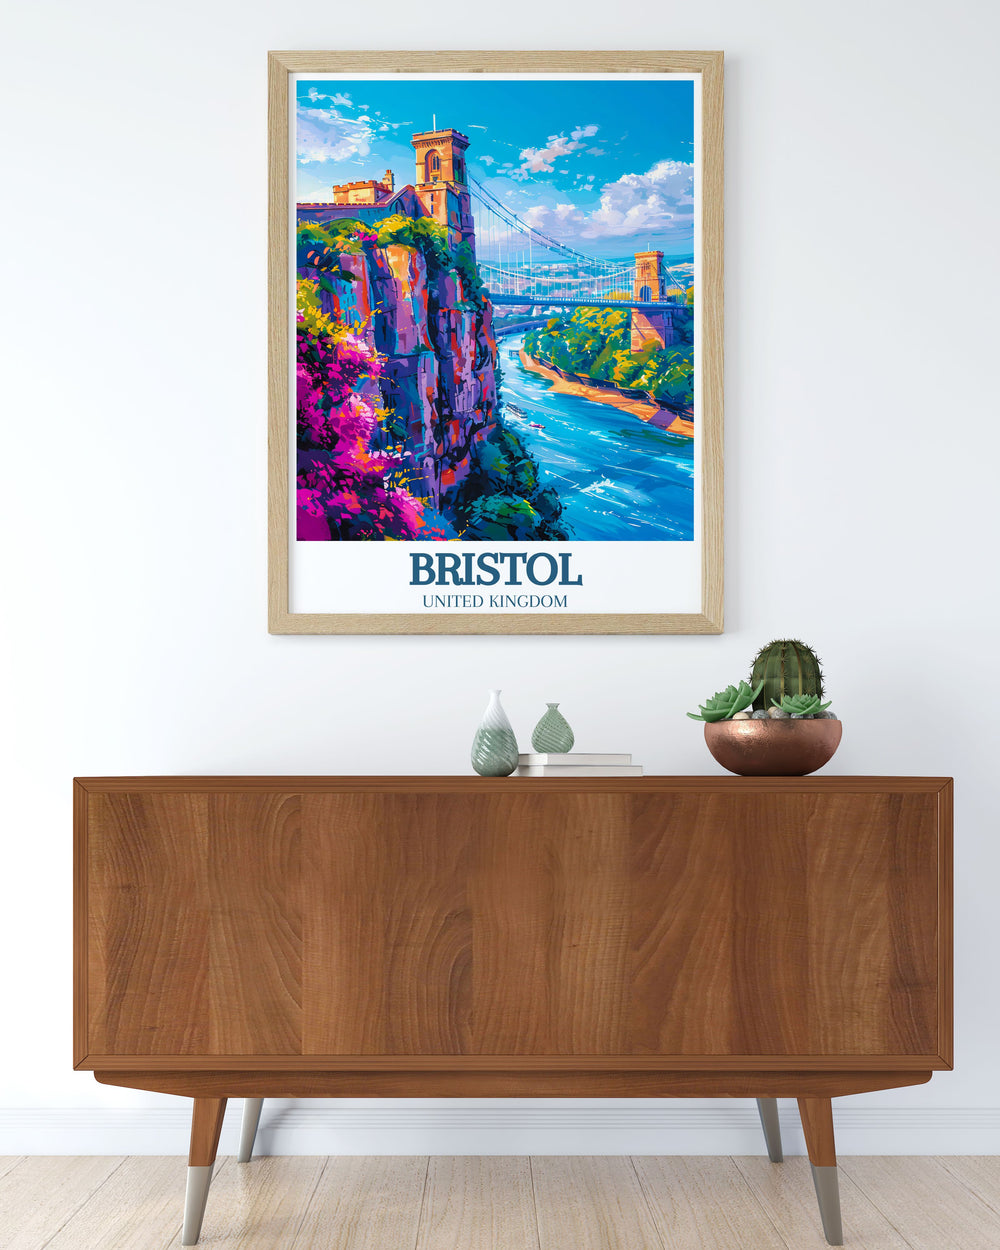 Beautiful Ashton Court Print showcasing the excitement of mountain biking on the Nova Trail MTB. Includes the Clifton suspension bridge River Avon, making it a great addition to cycling wall art collections and a striking piece of Bristol home decor.